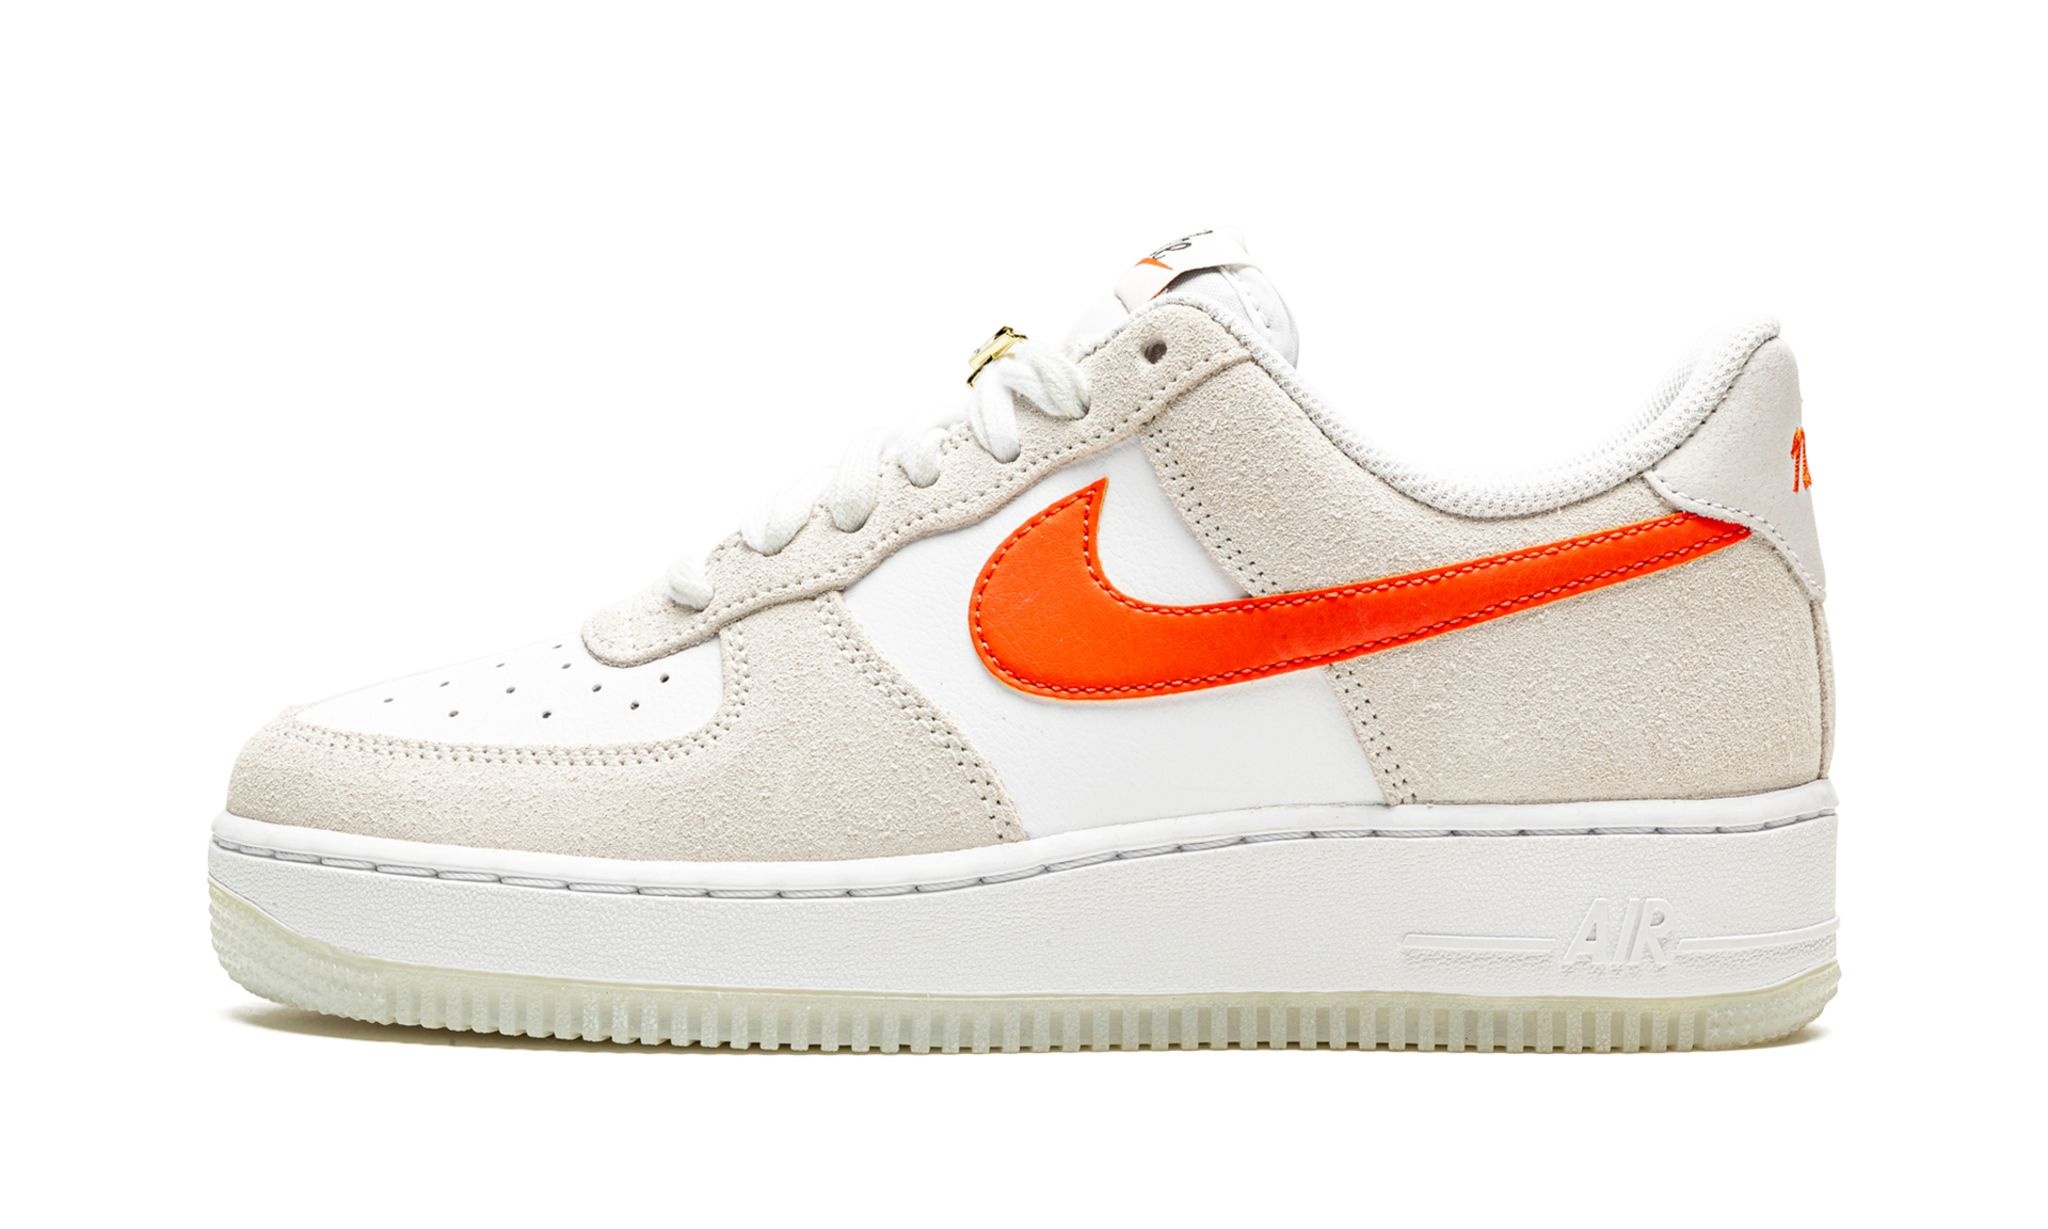 Wmns Air Force 1 '07 SE "First Use" - 7